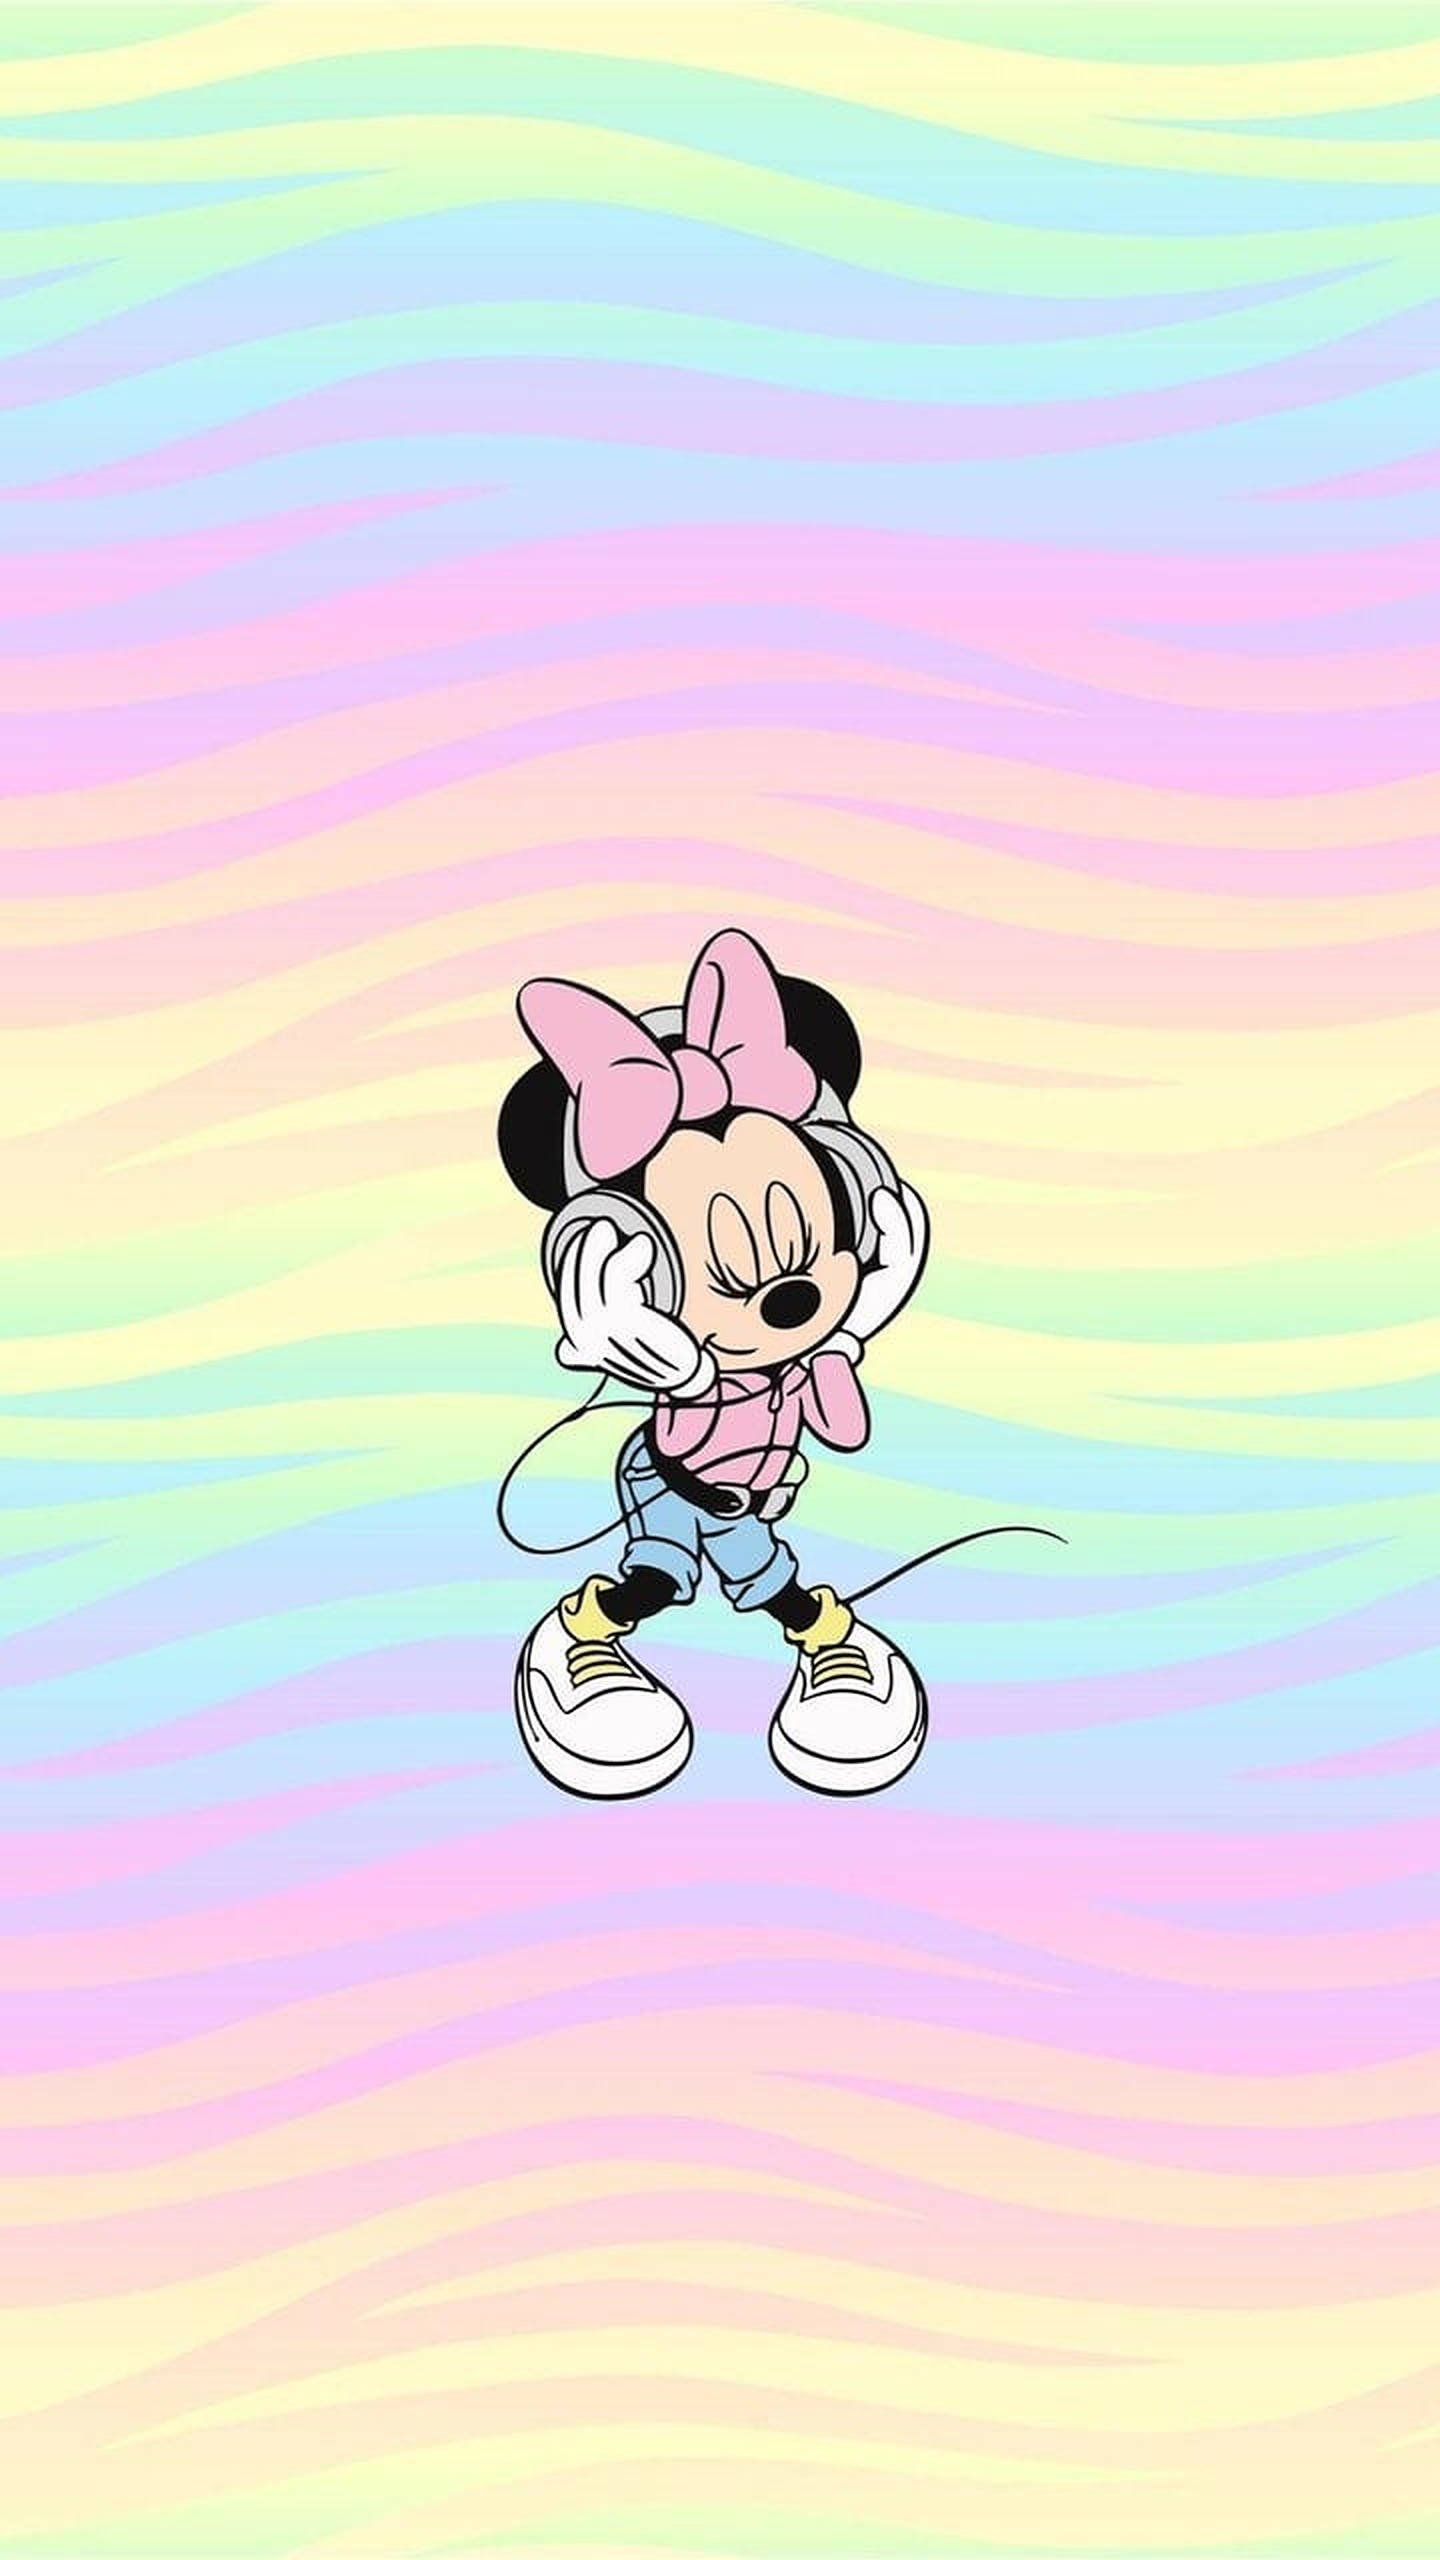 Download Minnie Mouse In Pastel Rainbow Background Wallpaper